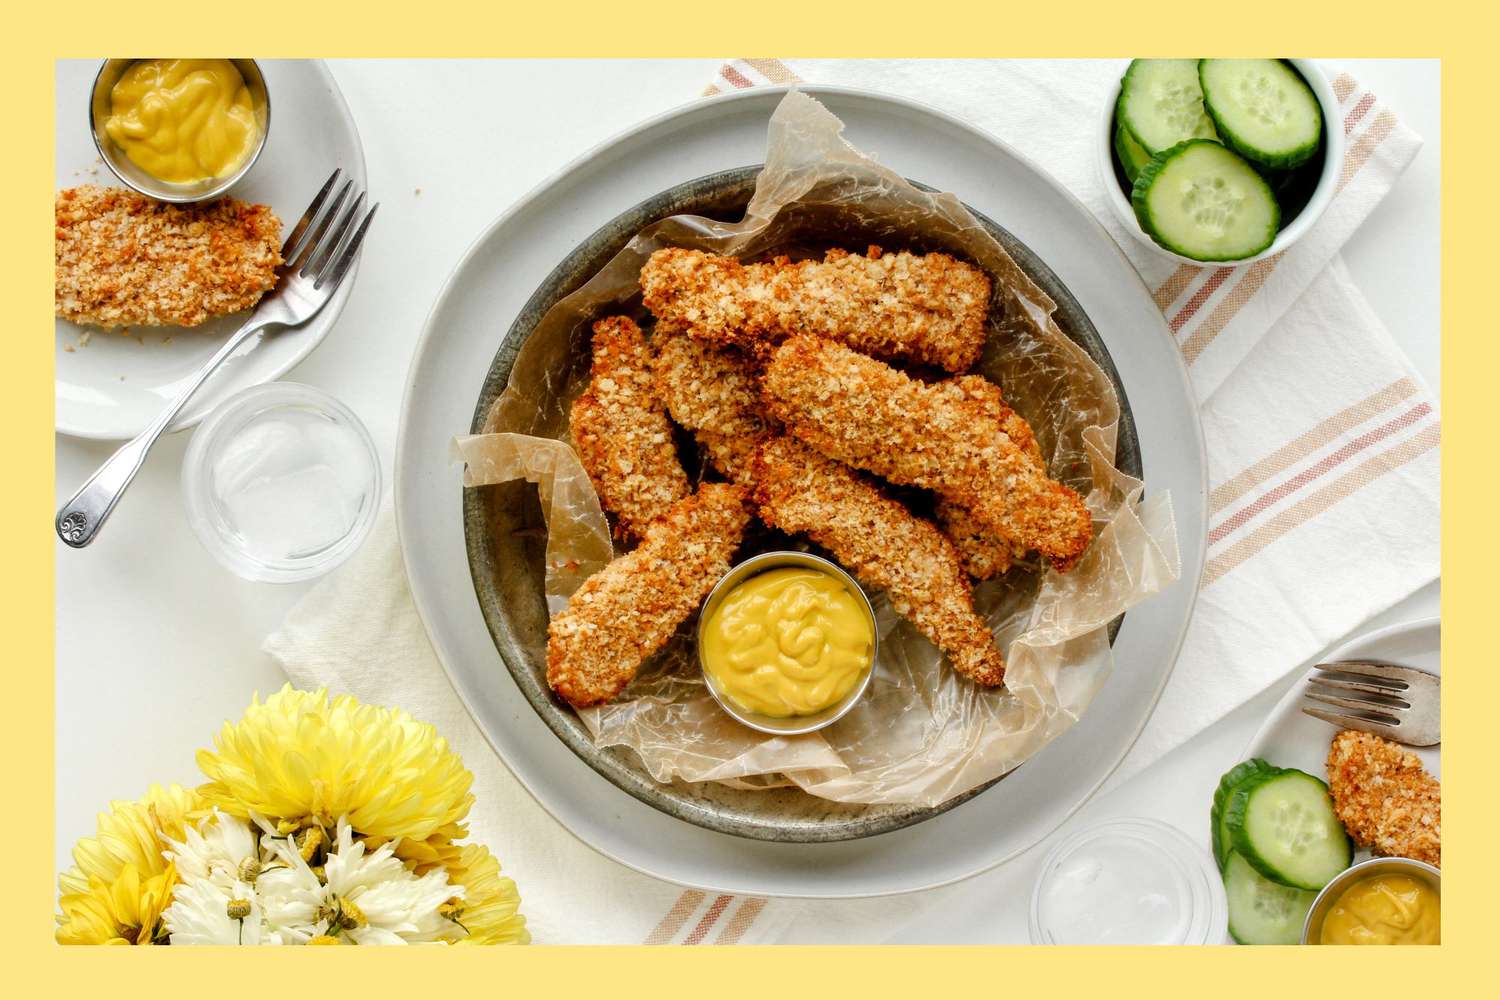 Homemade Chicken Tenders on a serving plate styled with cucumbers, mustard and ketchup on a white background